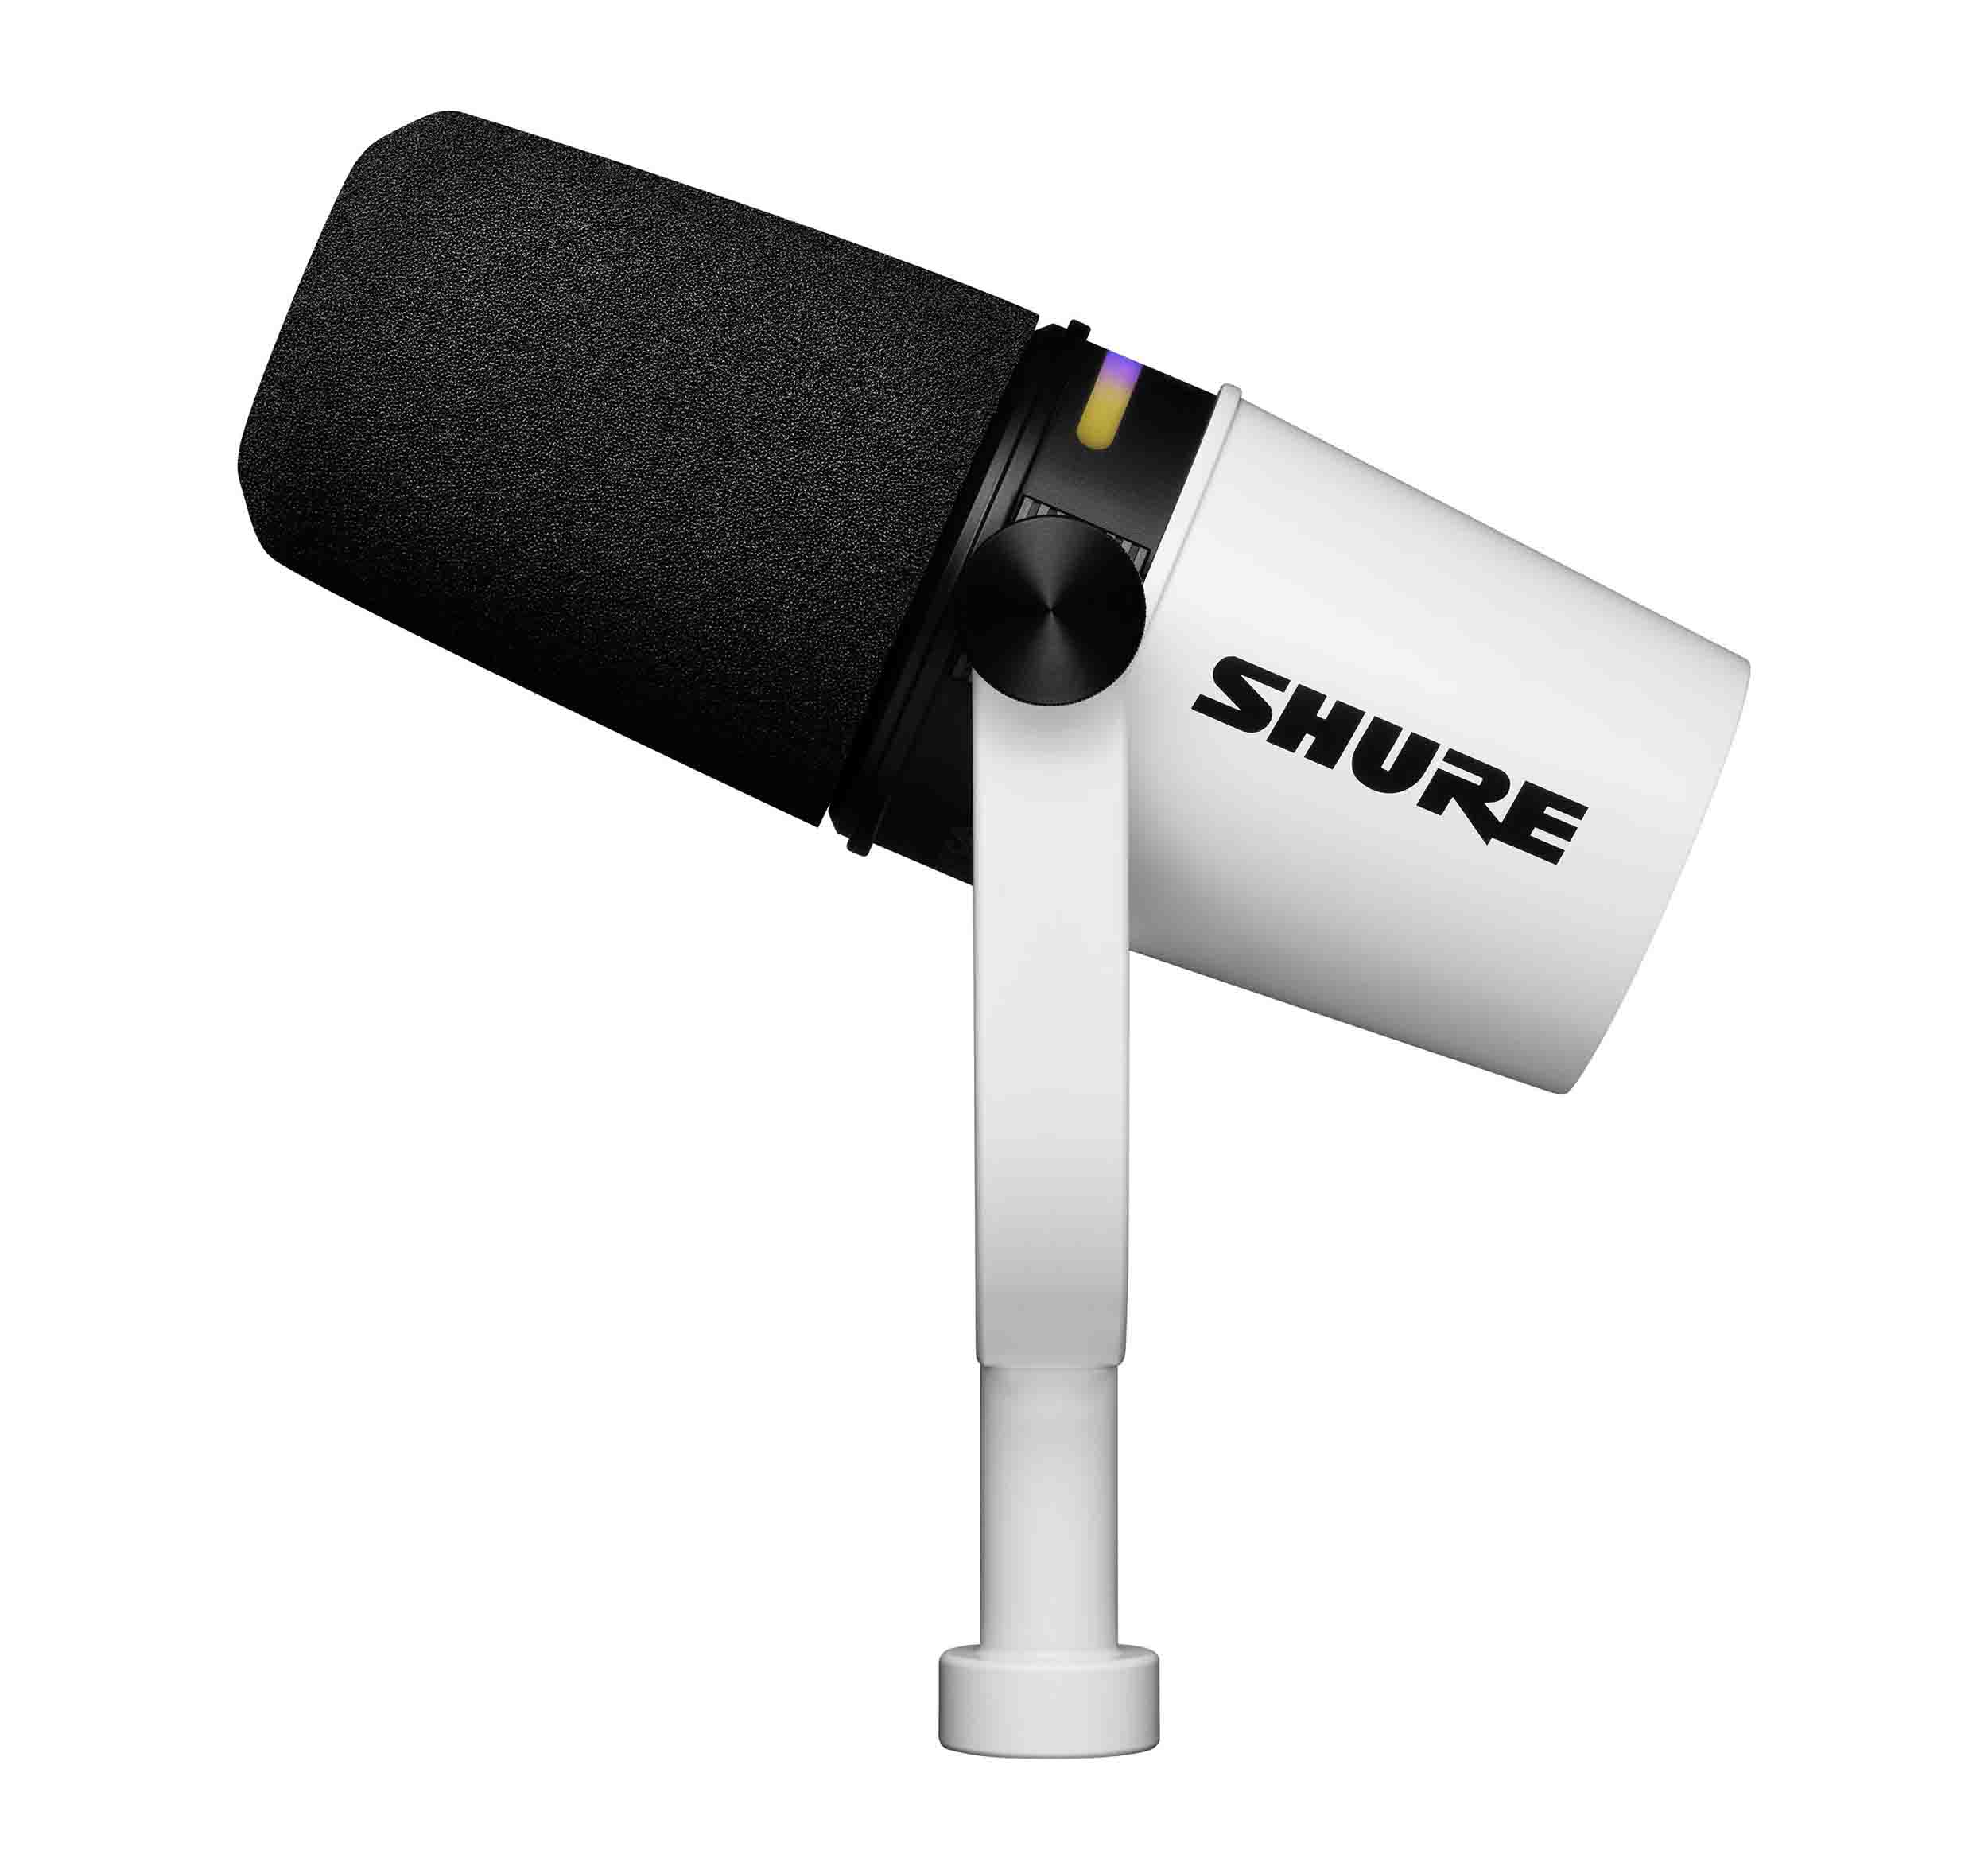 Shure MV7+-W Hybrid Podcast Microphone - White by Shure